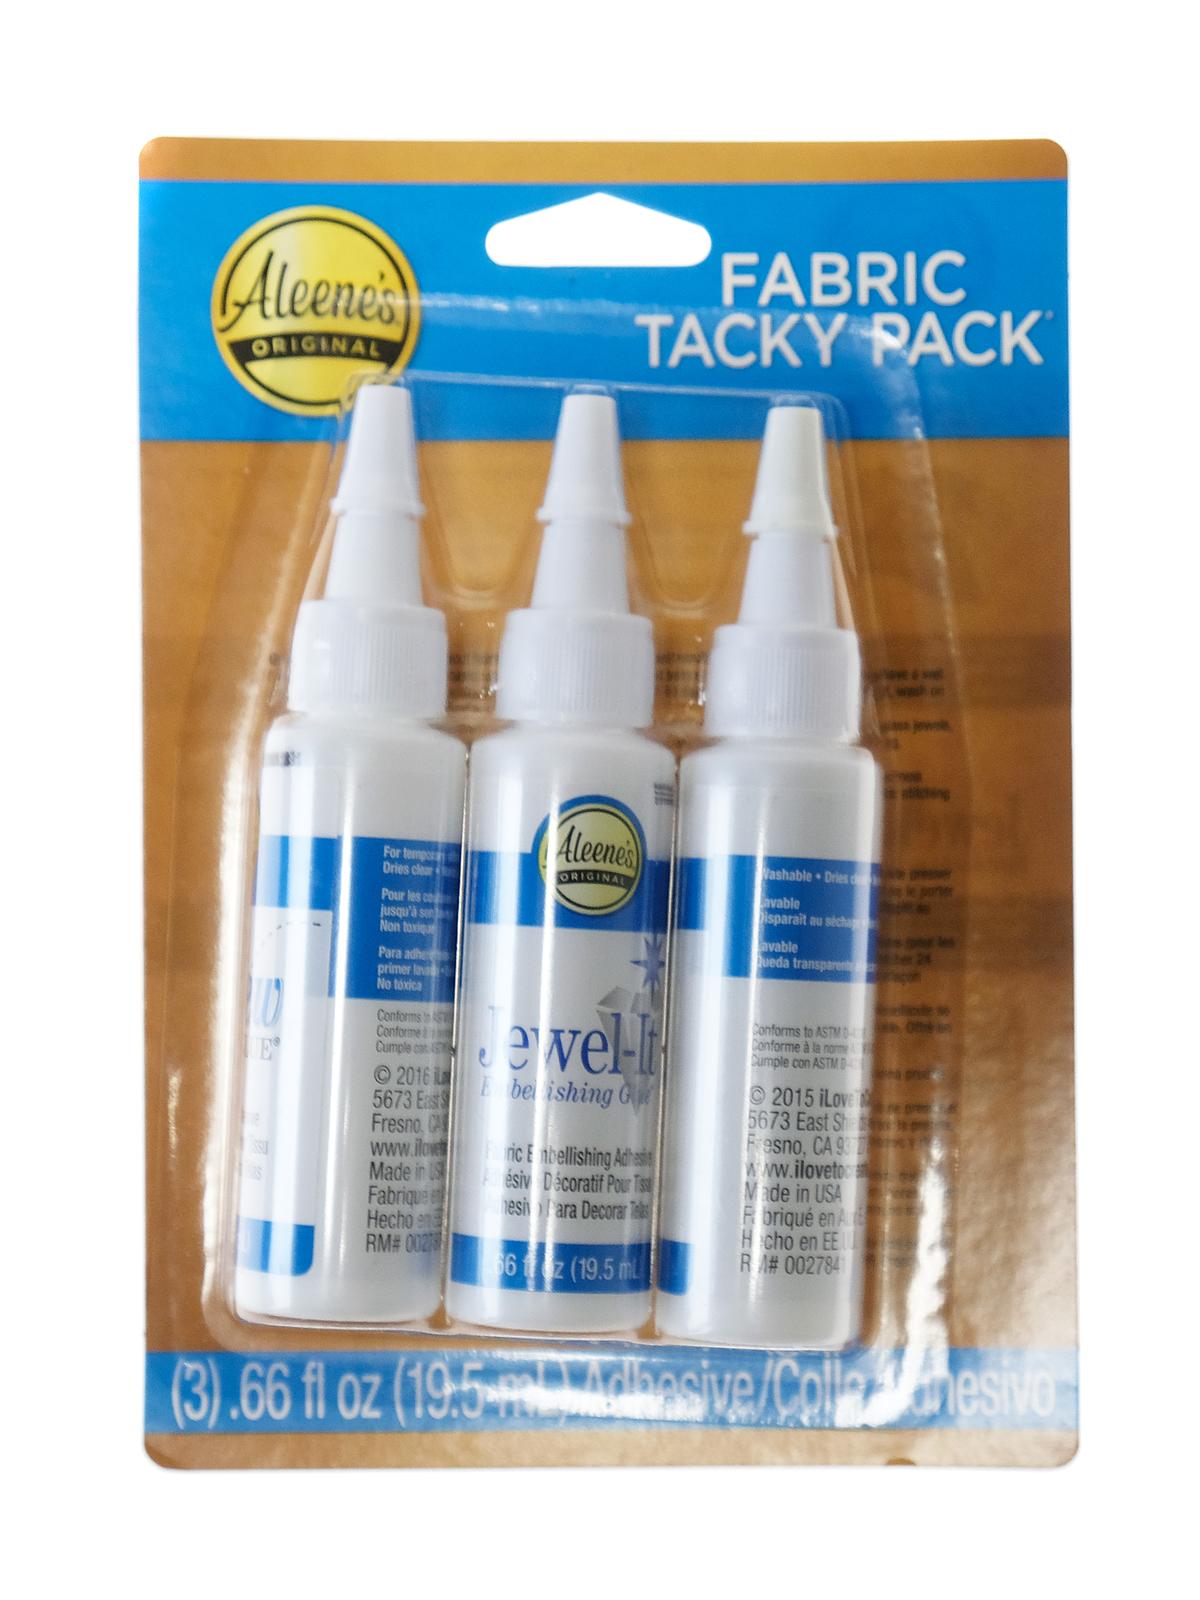 Fabric Tacky Pack 2 Oz. Bottles Set Of 3